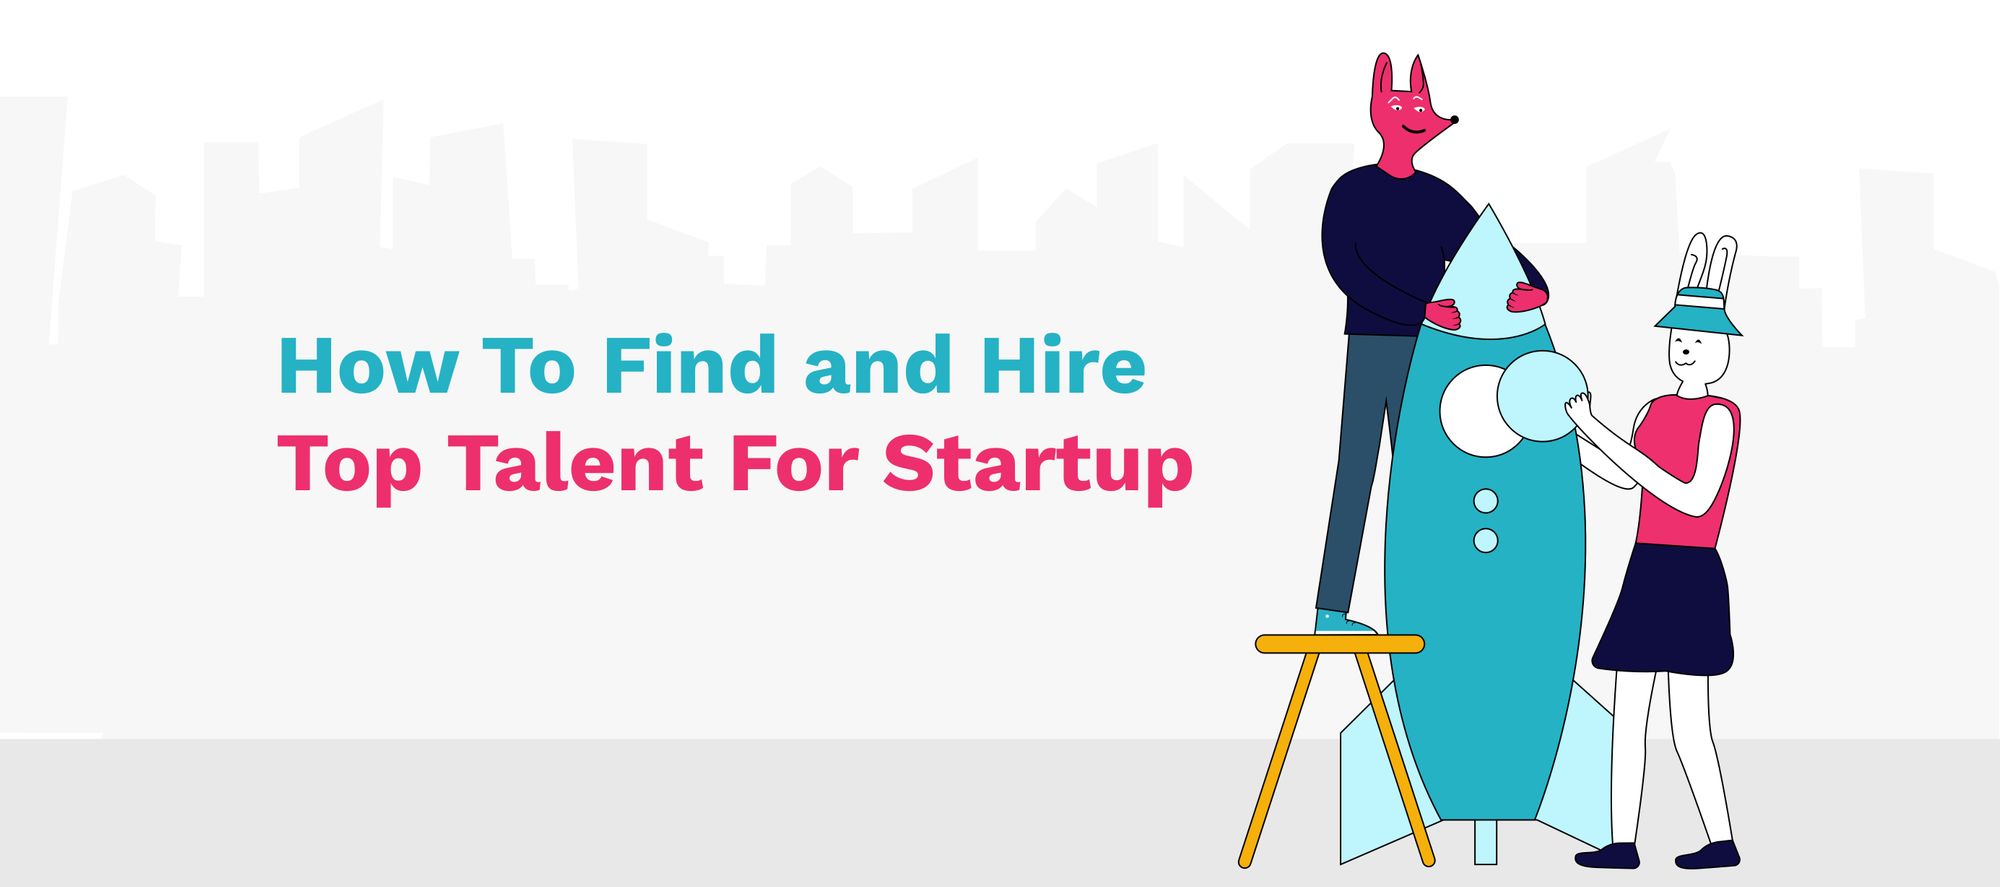 How to Find and Hire Top Tech Talent for Your Startup